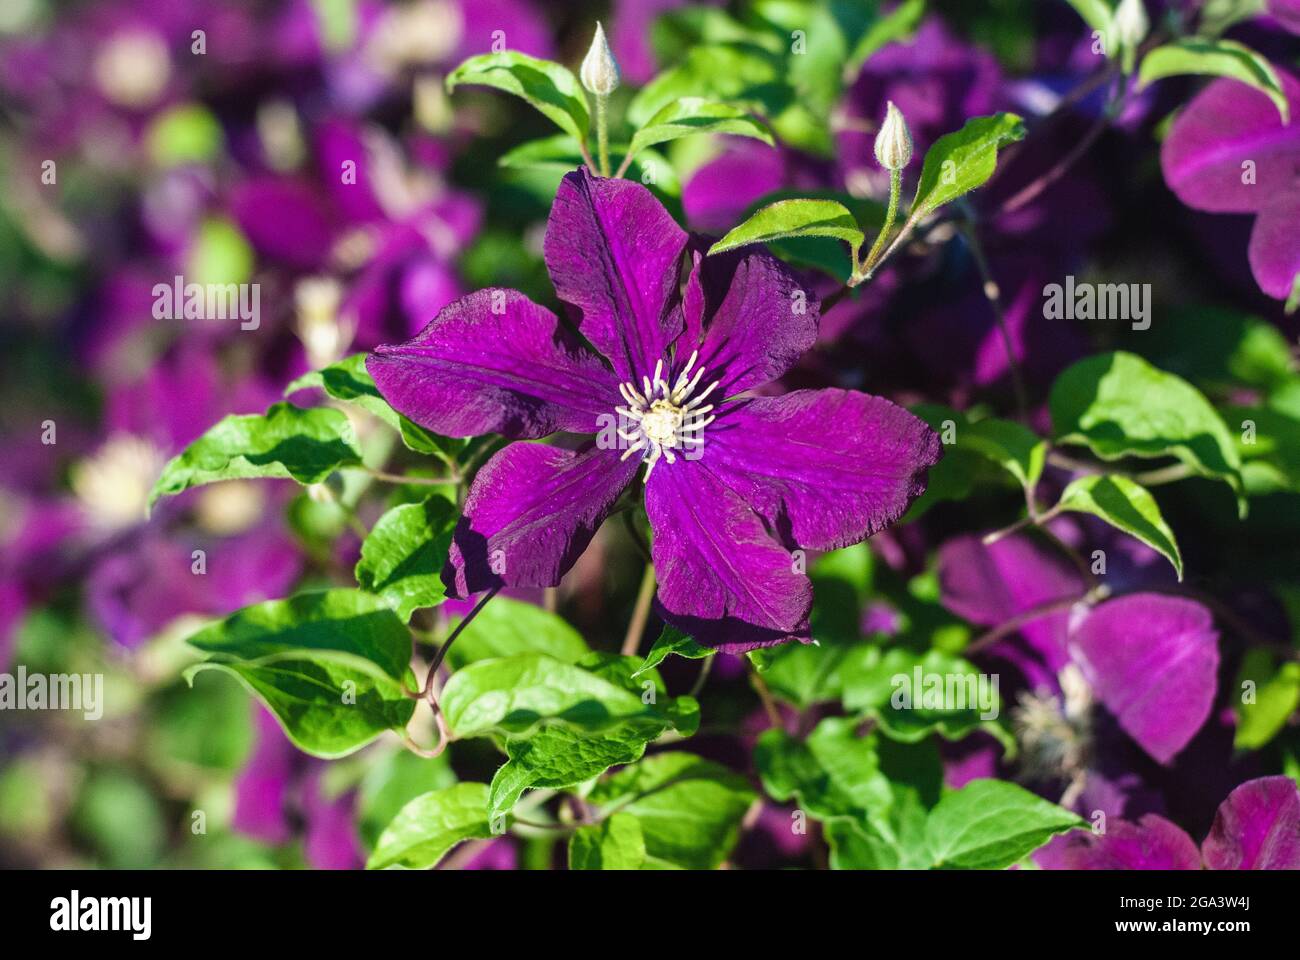 Purple clematis climber plant flowering in the garden, close-up Stock Photo